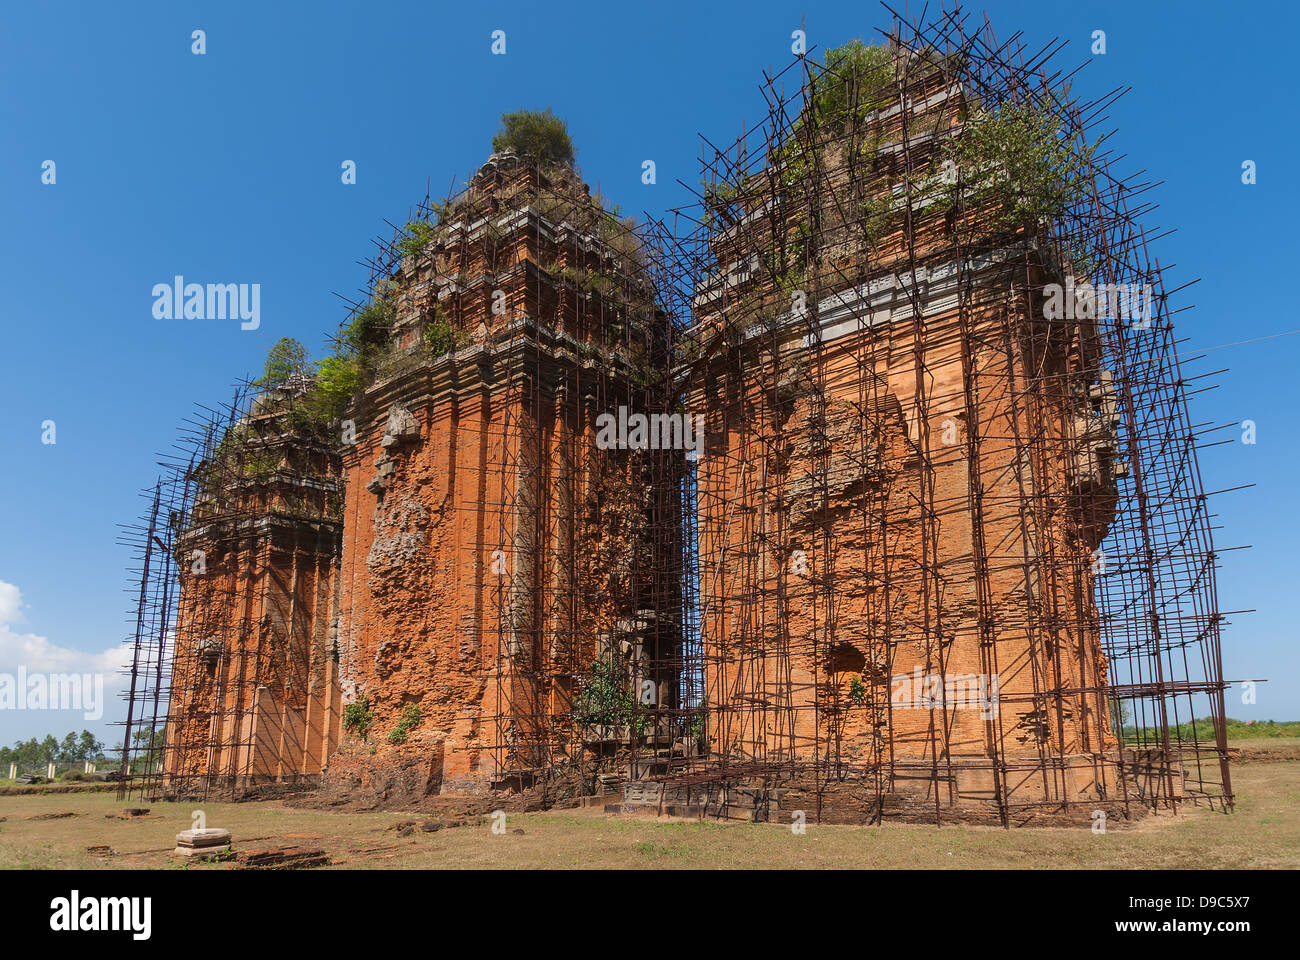 Vietnam, The three towers of Duong Long Cham towers. Stock Photo